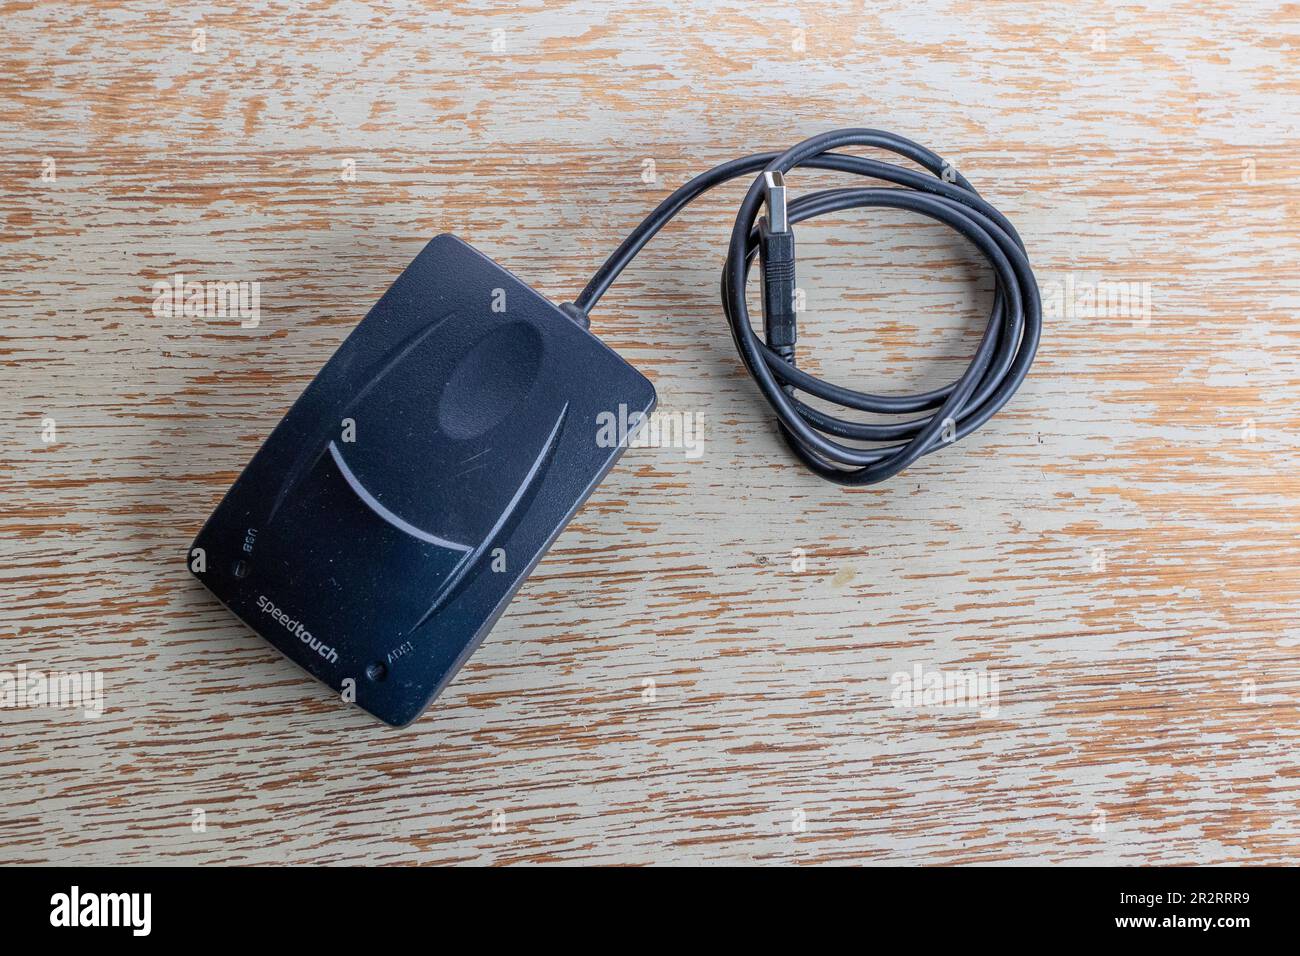 USB connected SpeedTouch 330 ADSL modem with Ethernet socket Stock Photo -  Alamy